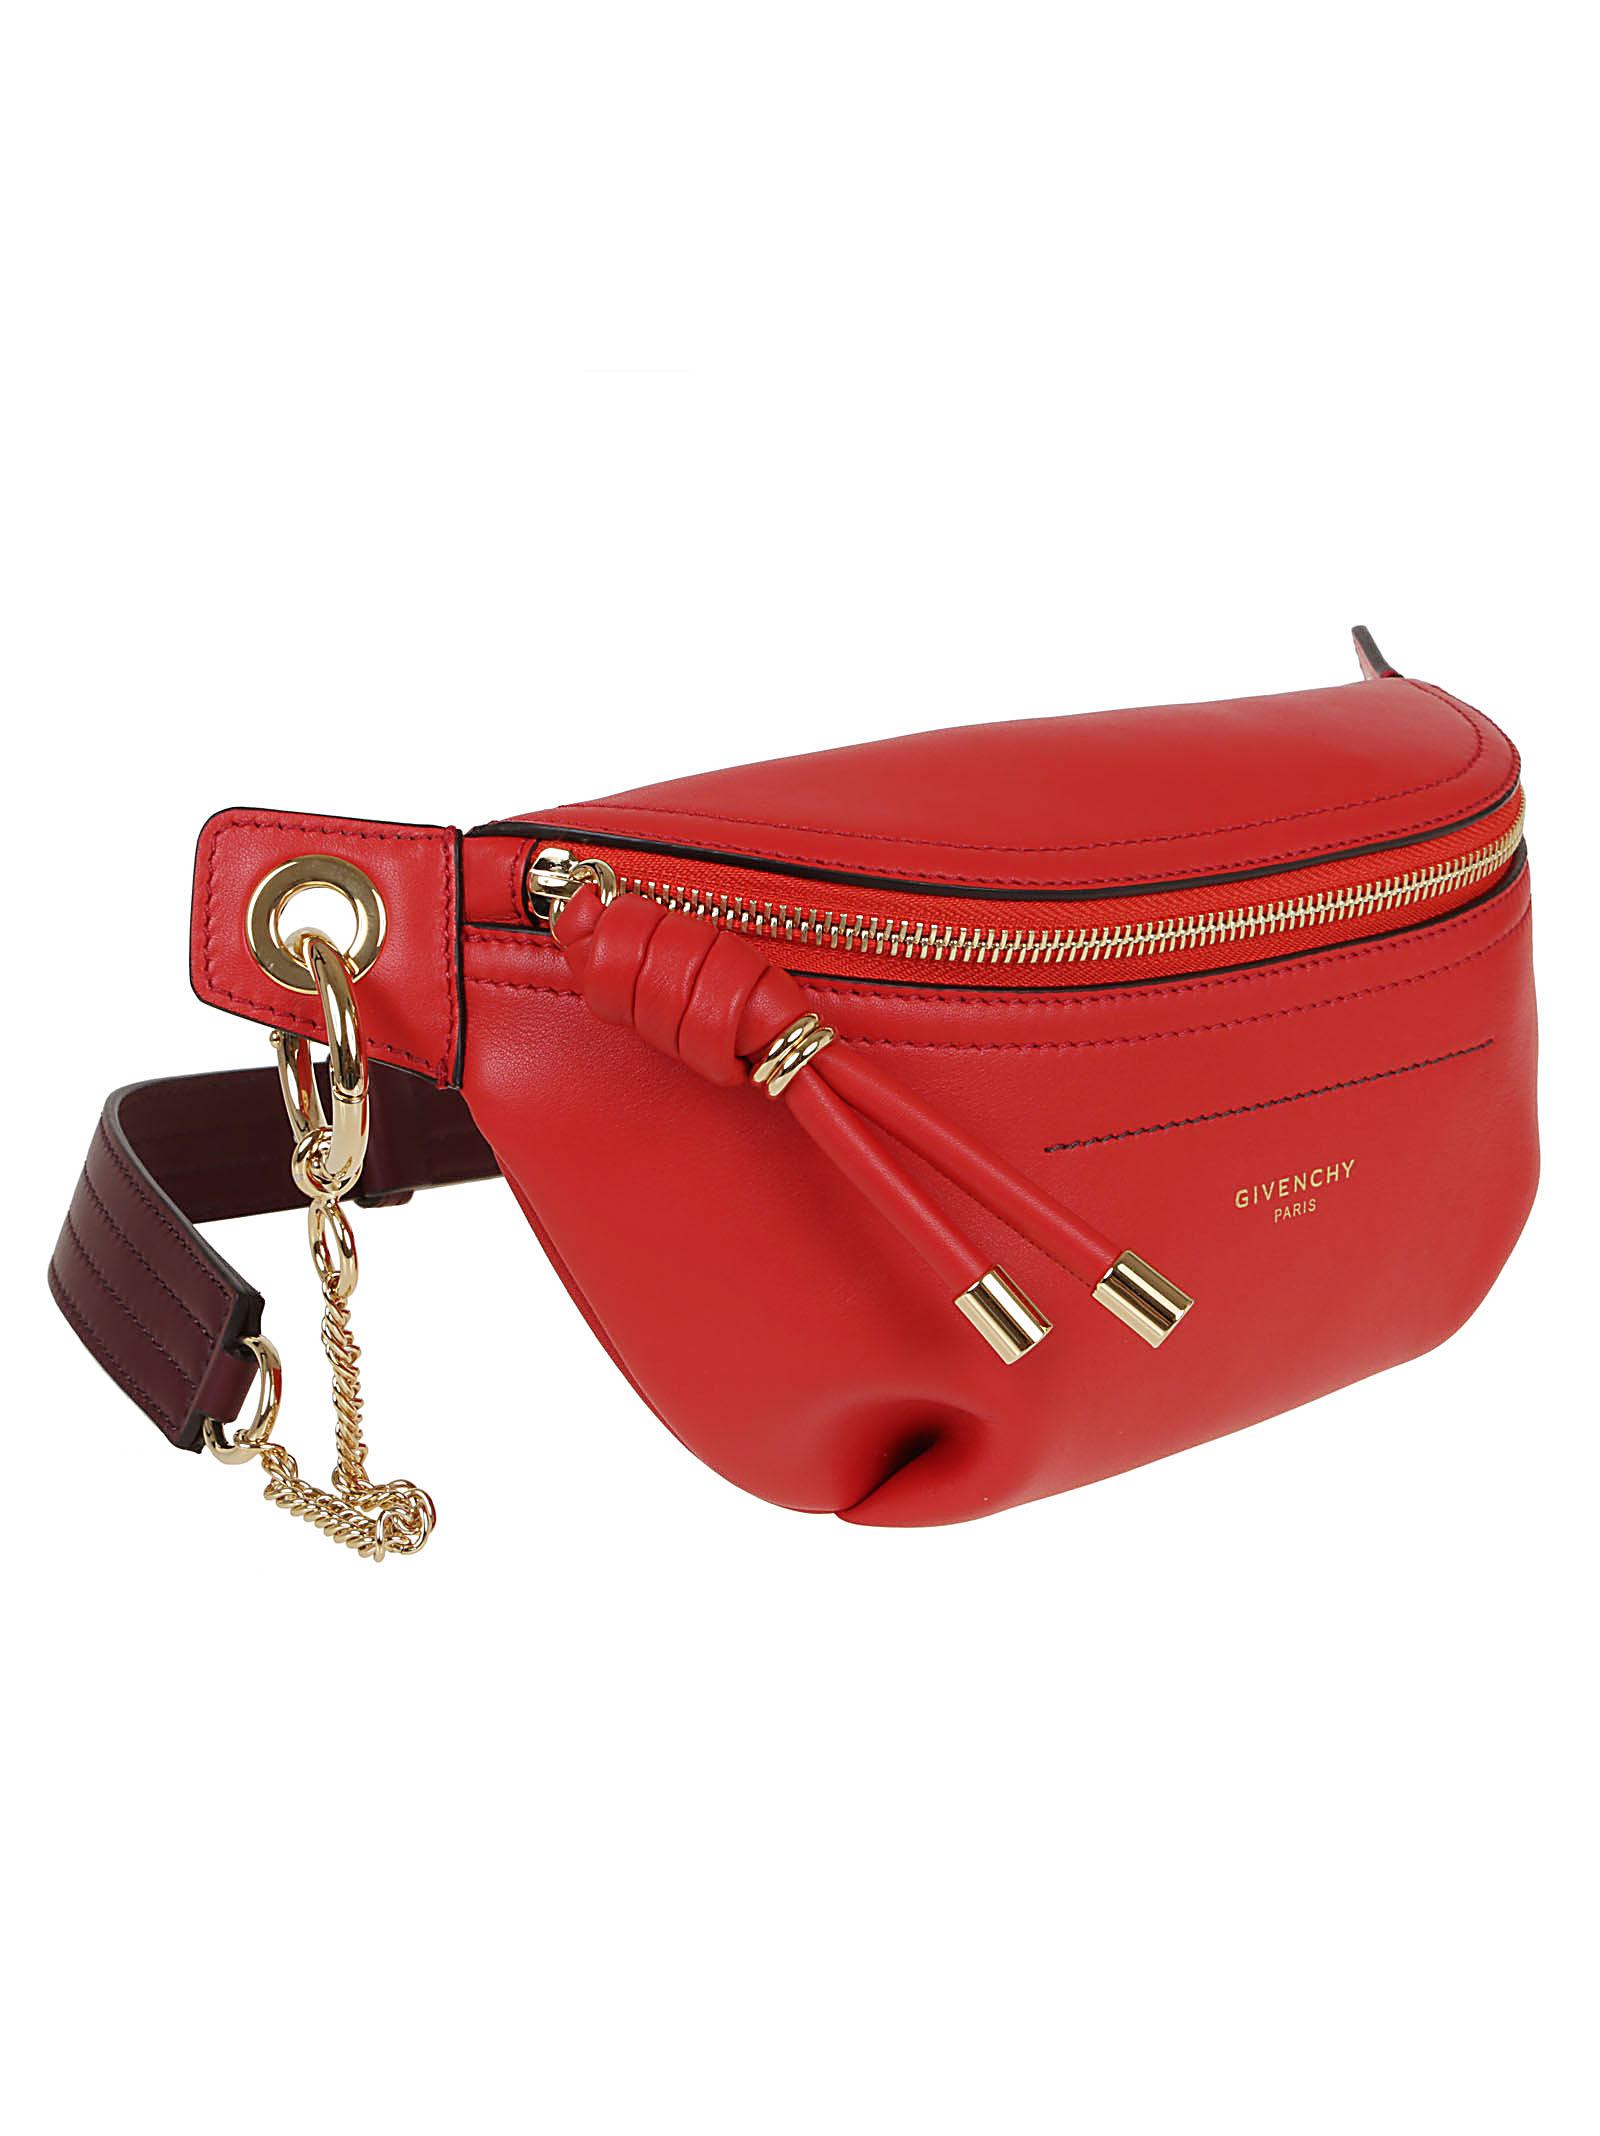 Givenchy Leather Whip Belt Bag Mini in Red - Lyst